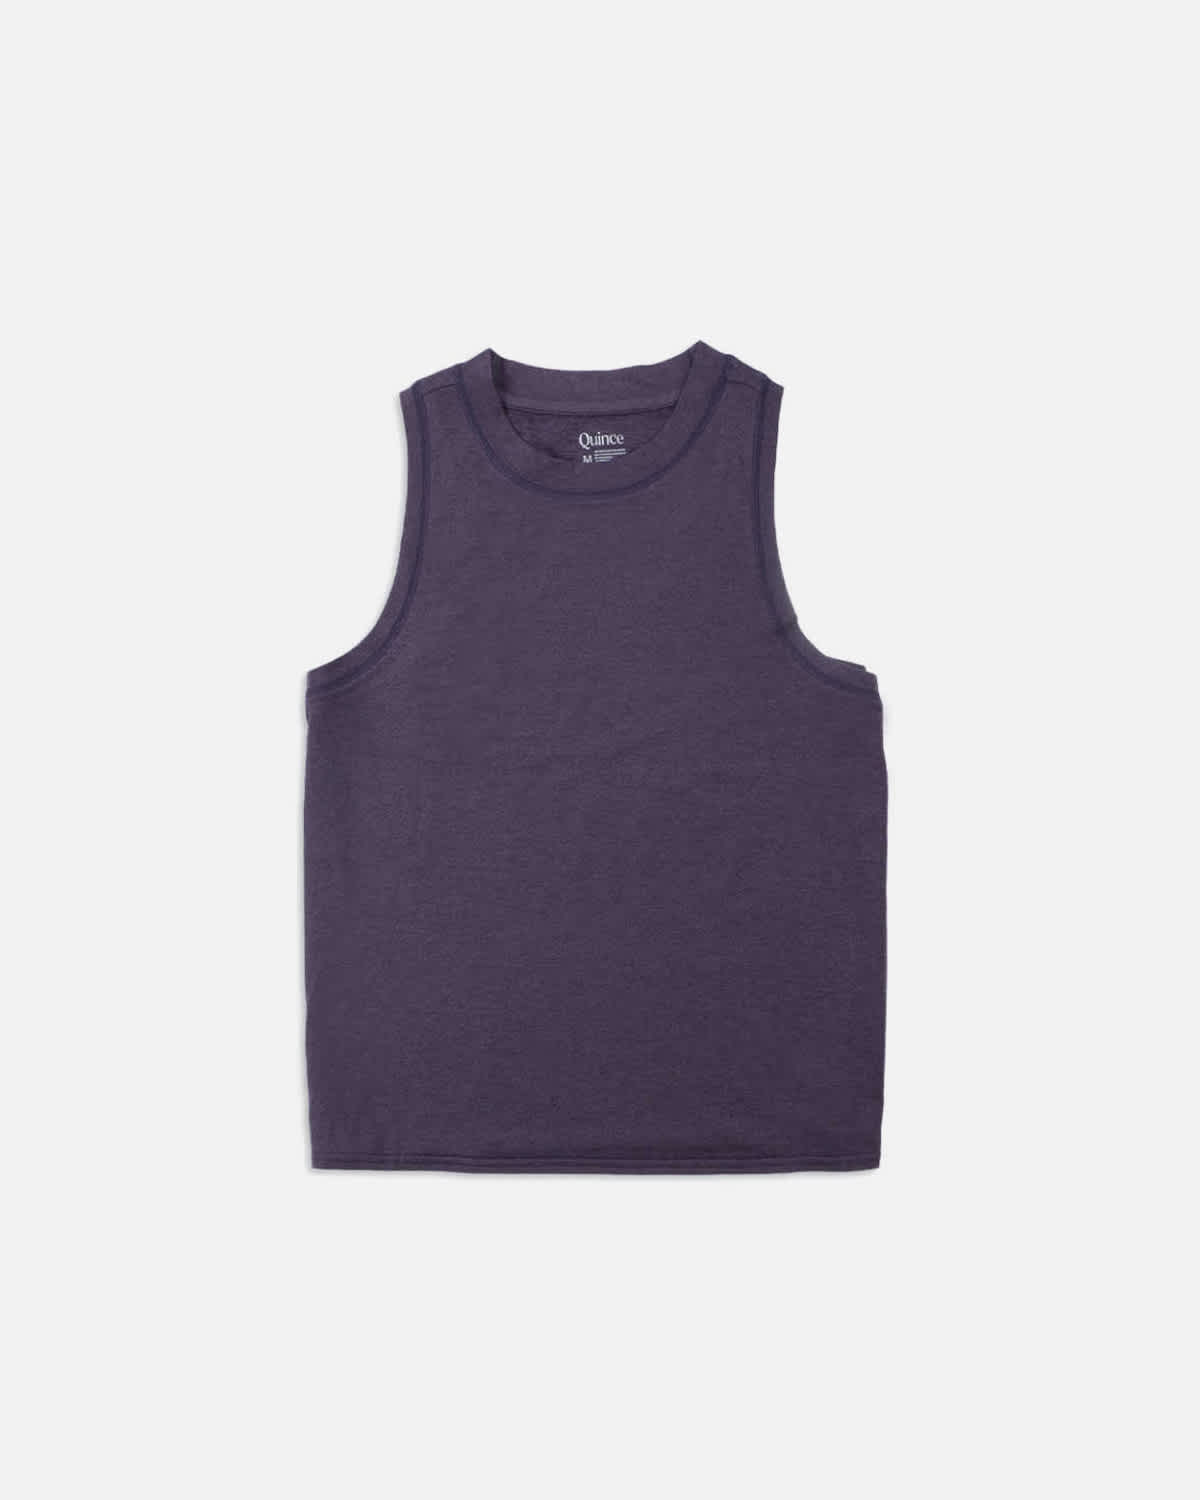 You May Also Like - Flowknit Ultra-Soft Performance Tank - Royal Purple